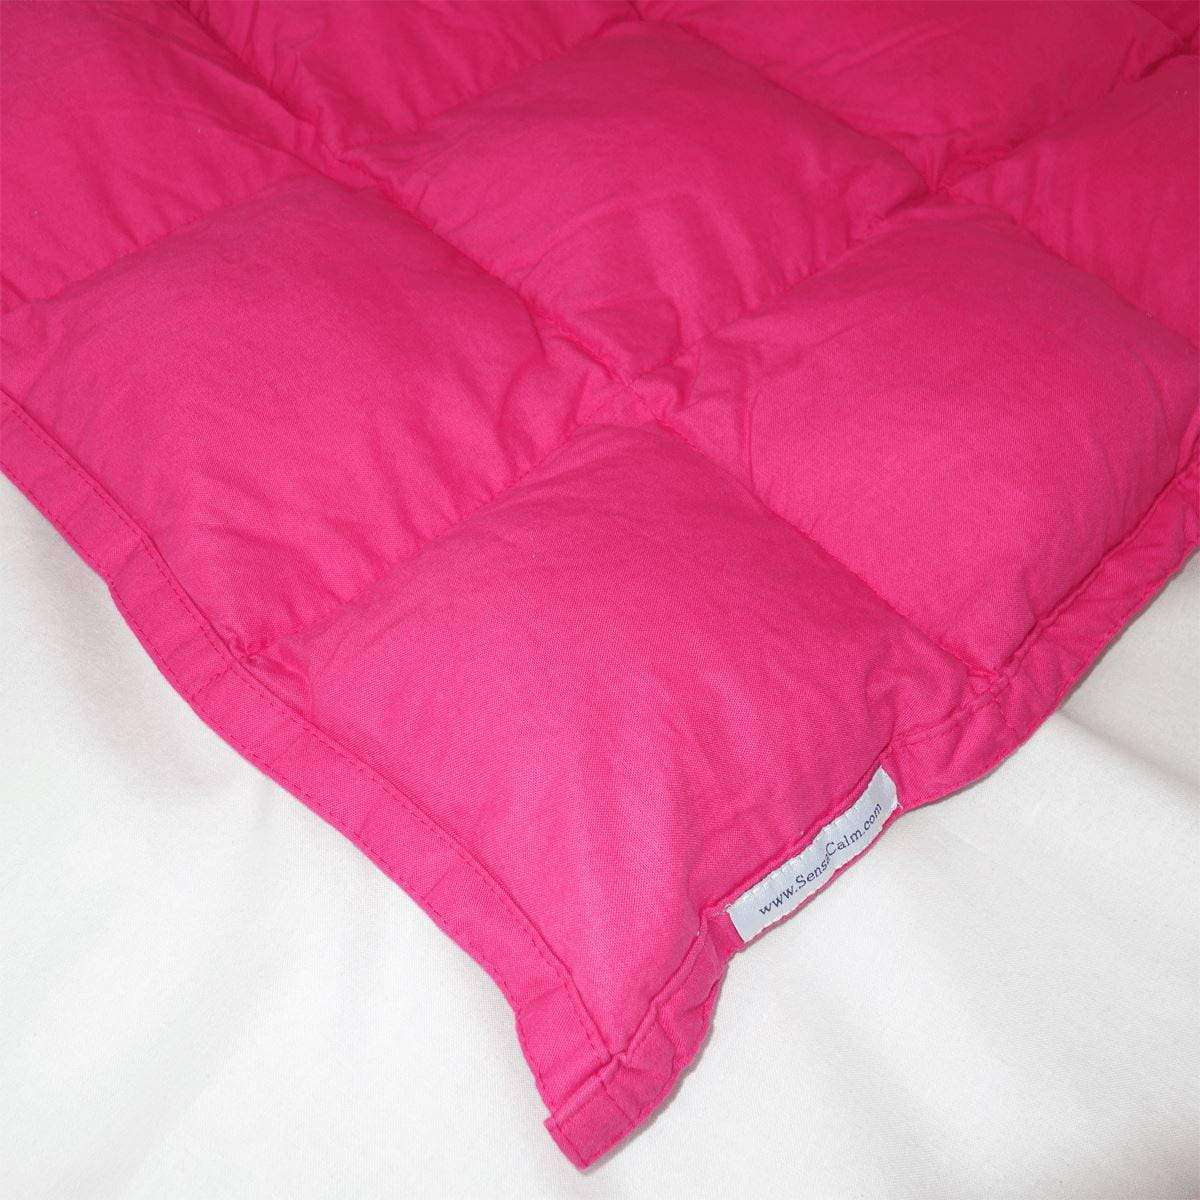 Classic Weighted Blanket - Raspberry